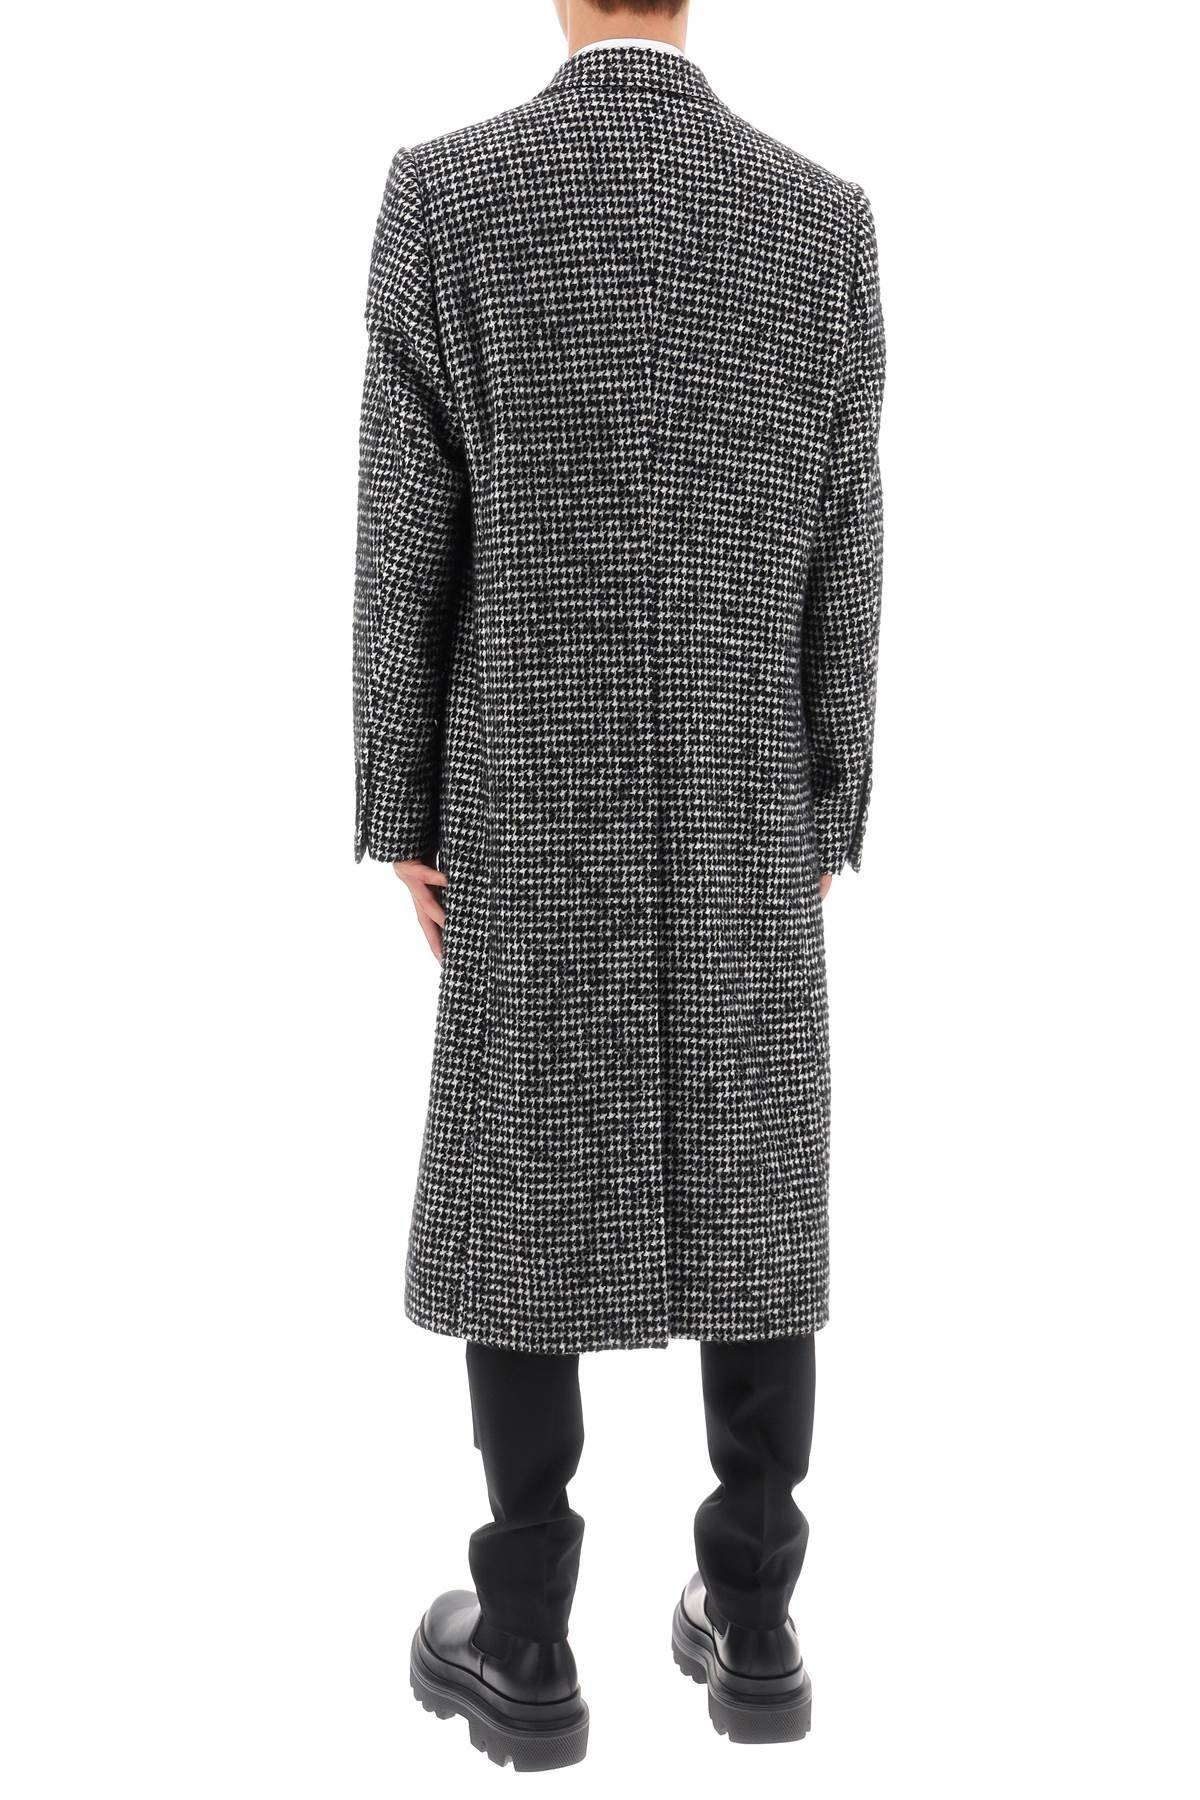 RE-EDITION COAT IN HOUNDSTOOTH WOOL - 4